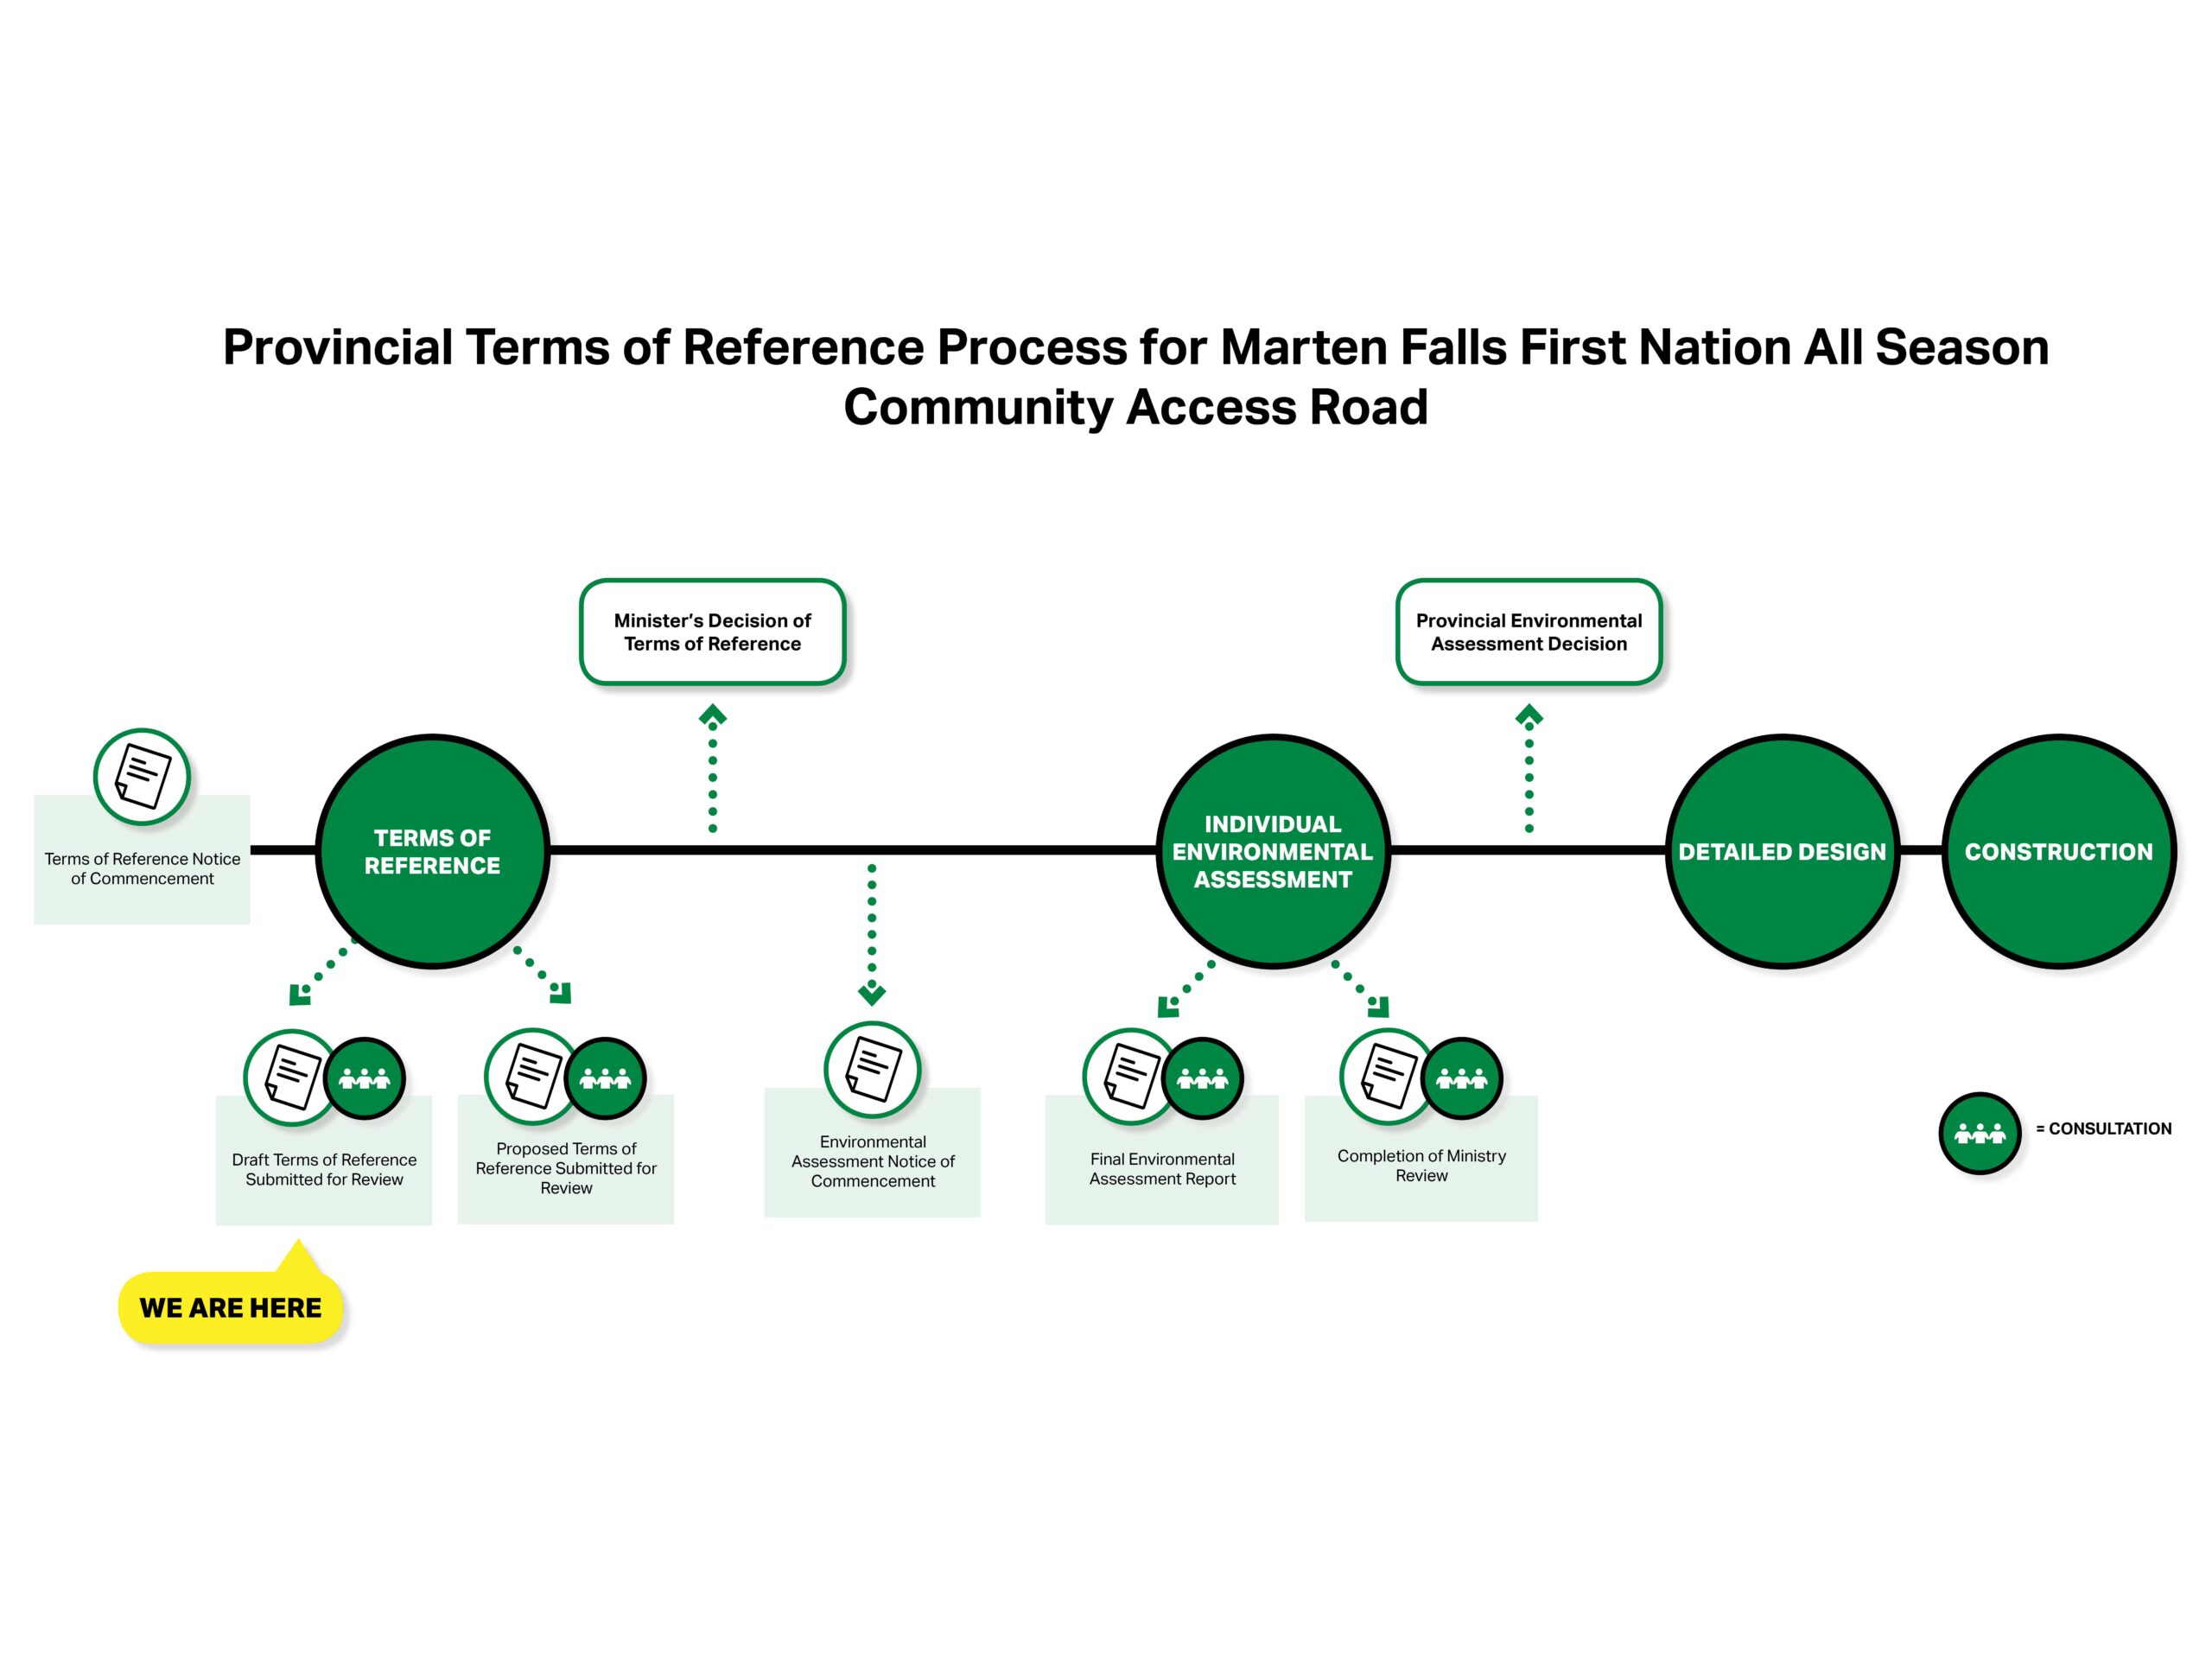 Provincial Terms of Reference Process